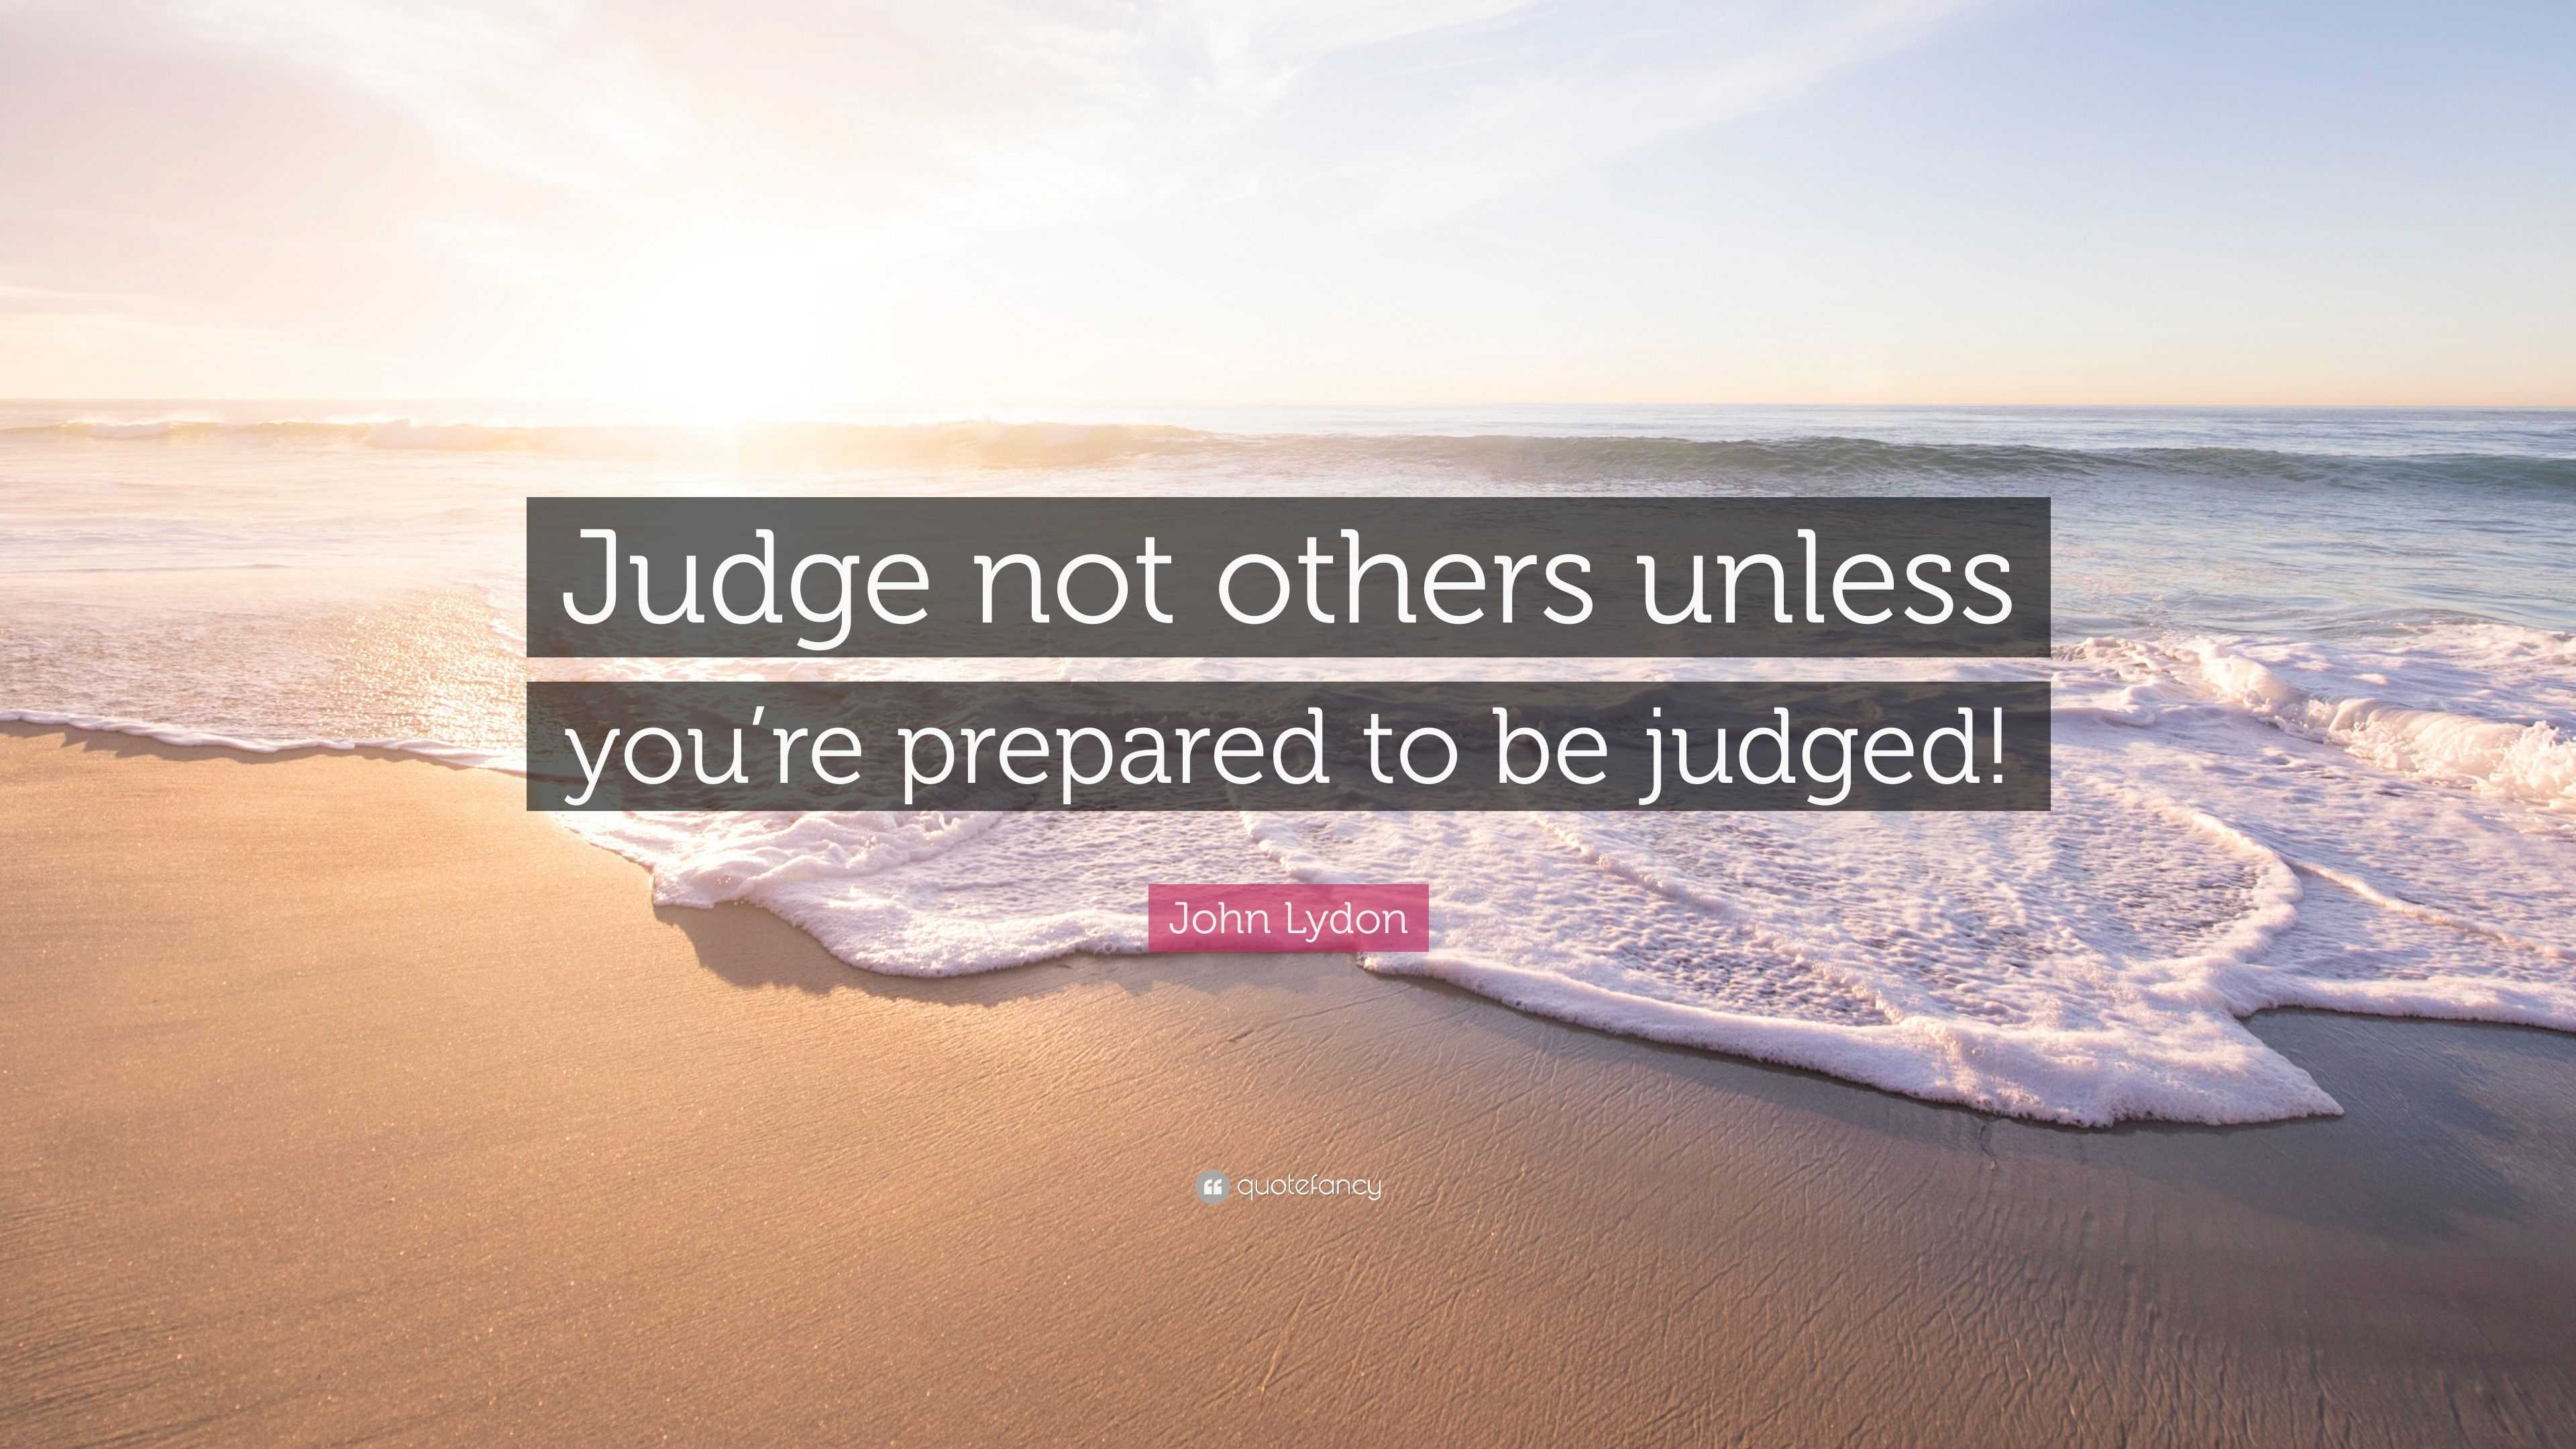 John Lydon Quote: “Judge not others unless you’re prepared to be judged!”